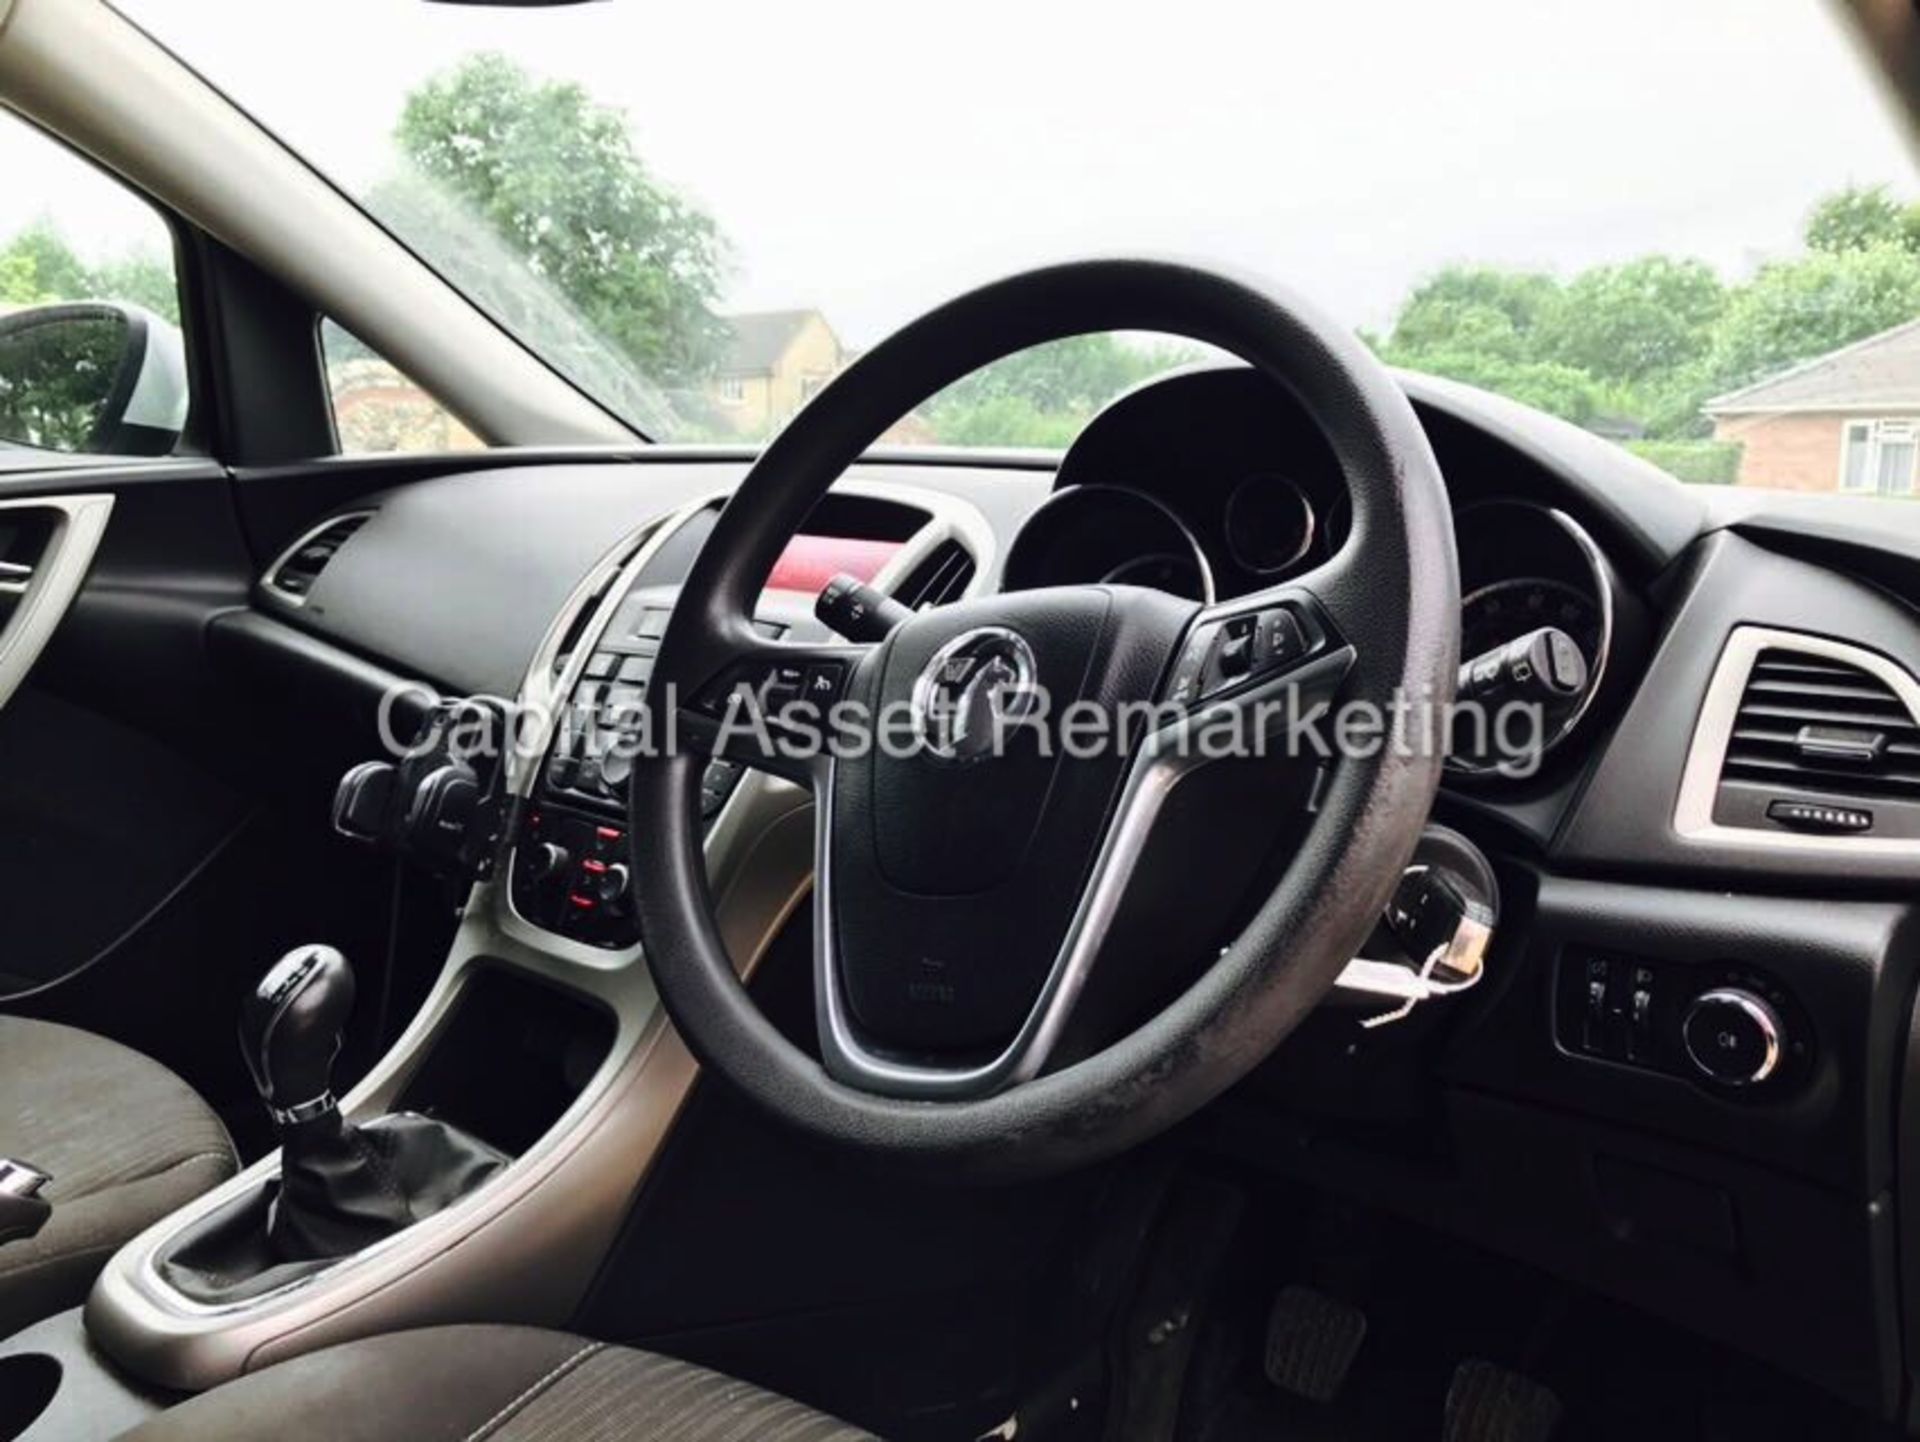 (ON SALE) VAUXHALL ASTRA 'EXCLUSIVE' (2012 MODEL) '1.7 CDTI - ECOFLEX - 6 SPEED' *AIR CON* (1 OWNER) - Image 10 of 19